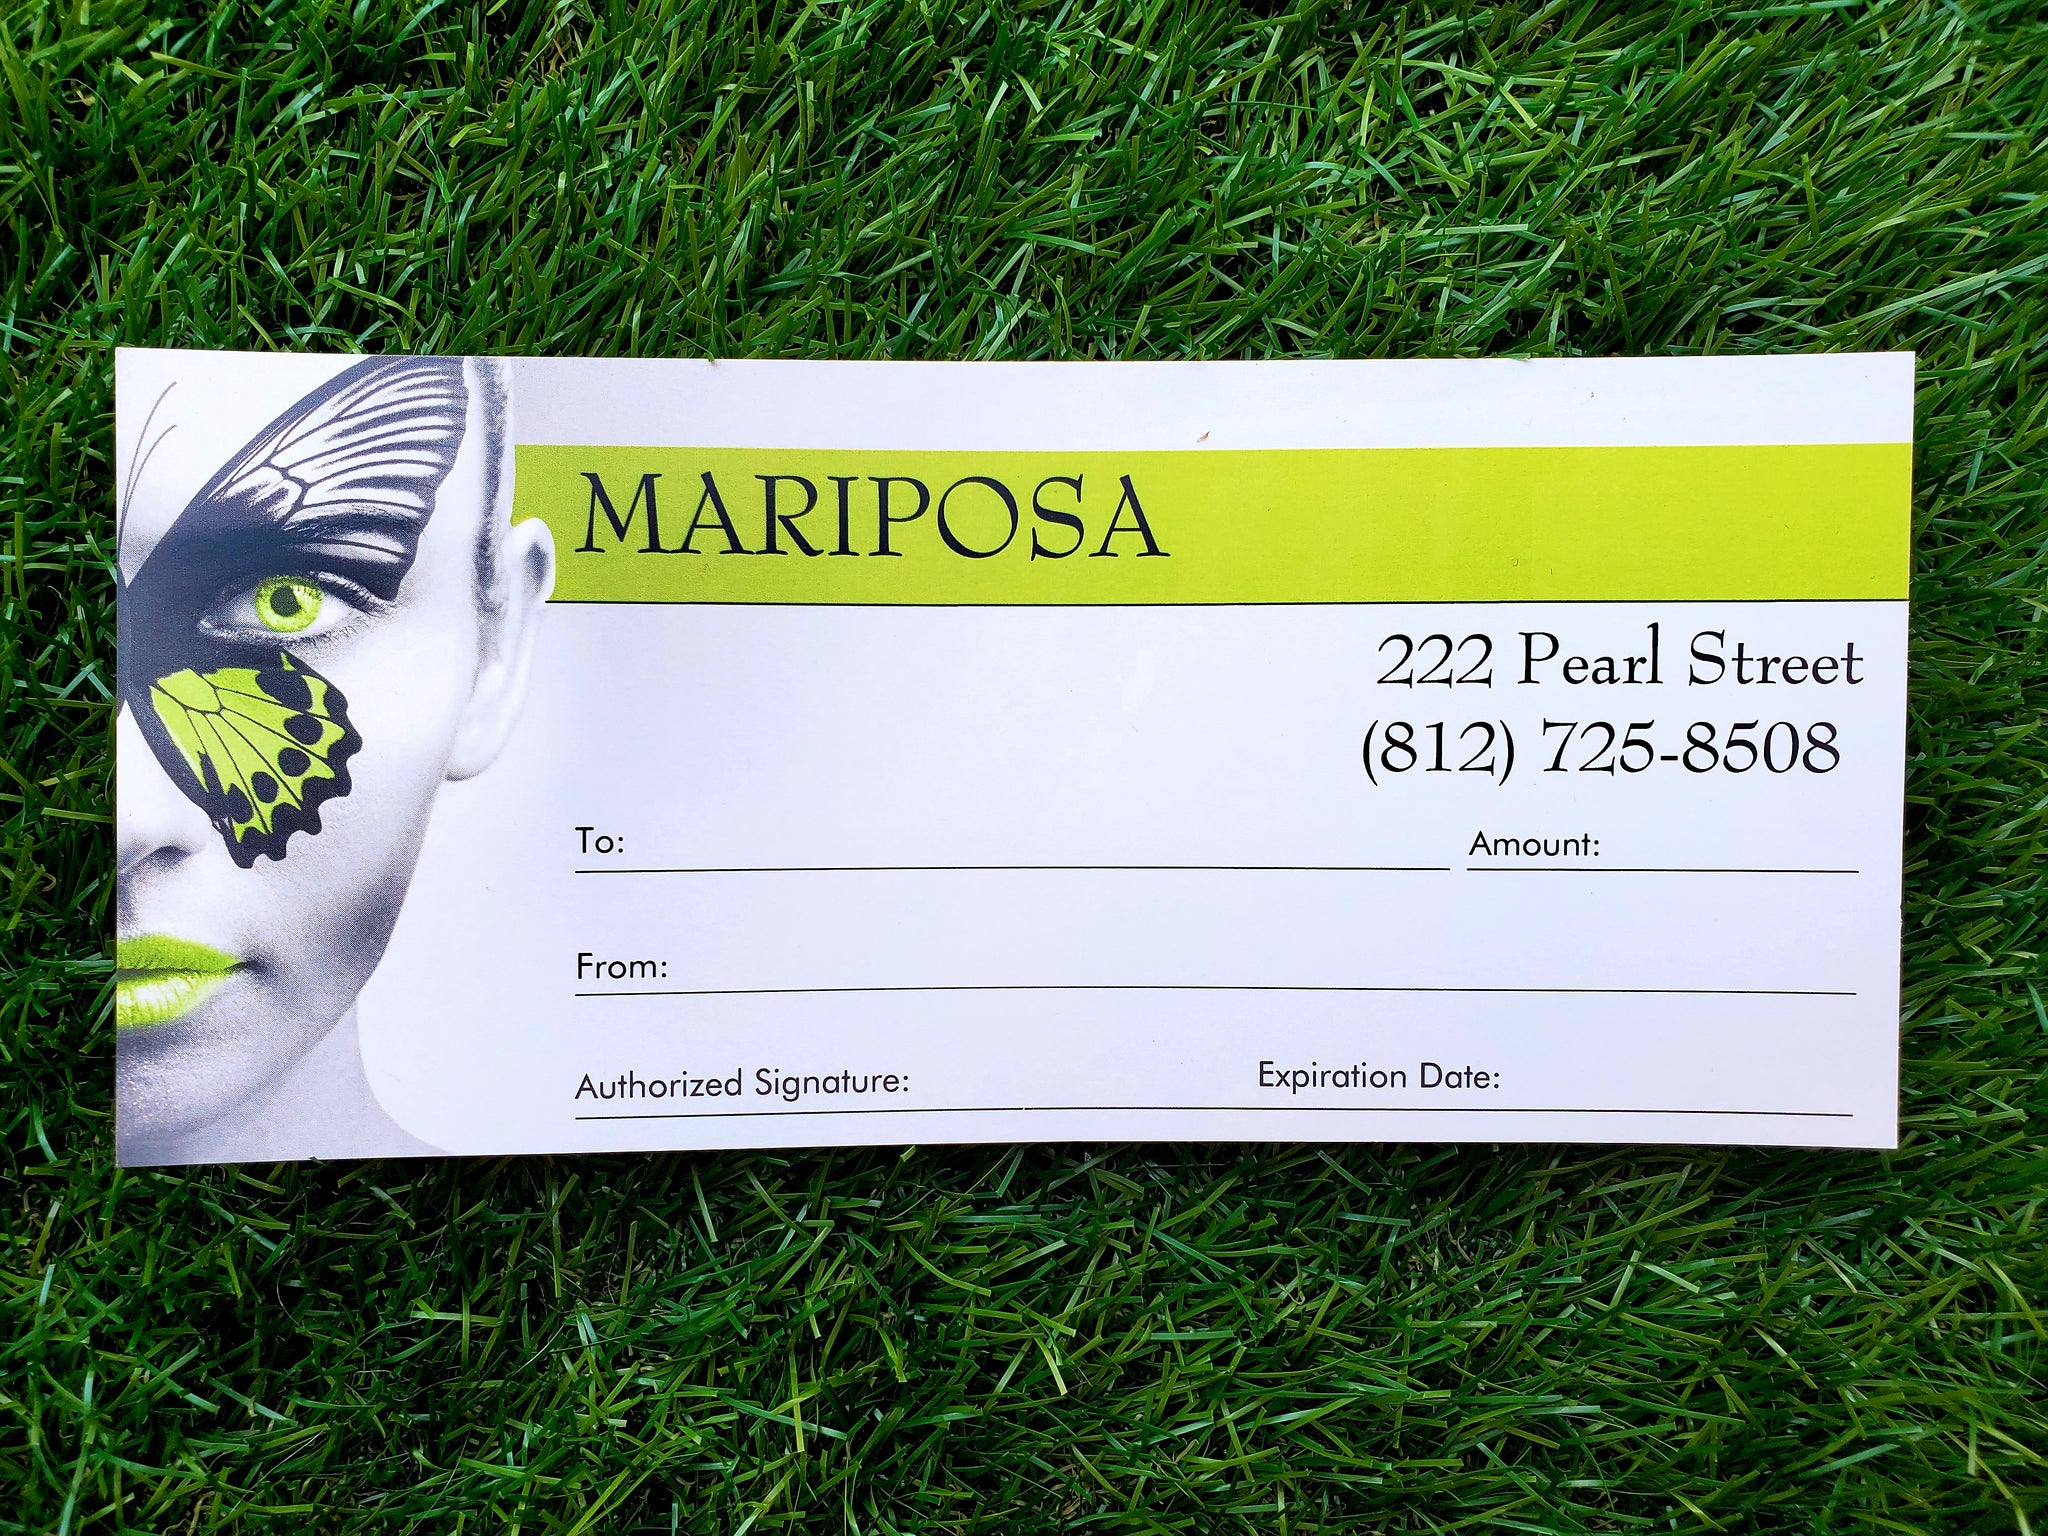 Mariposa Gift Card-One size fits all!